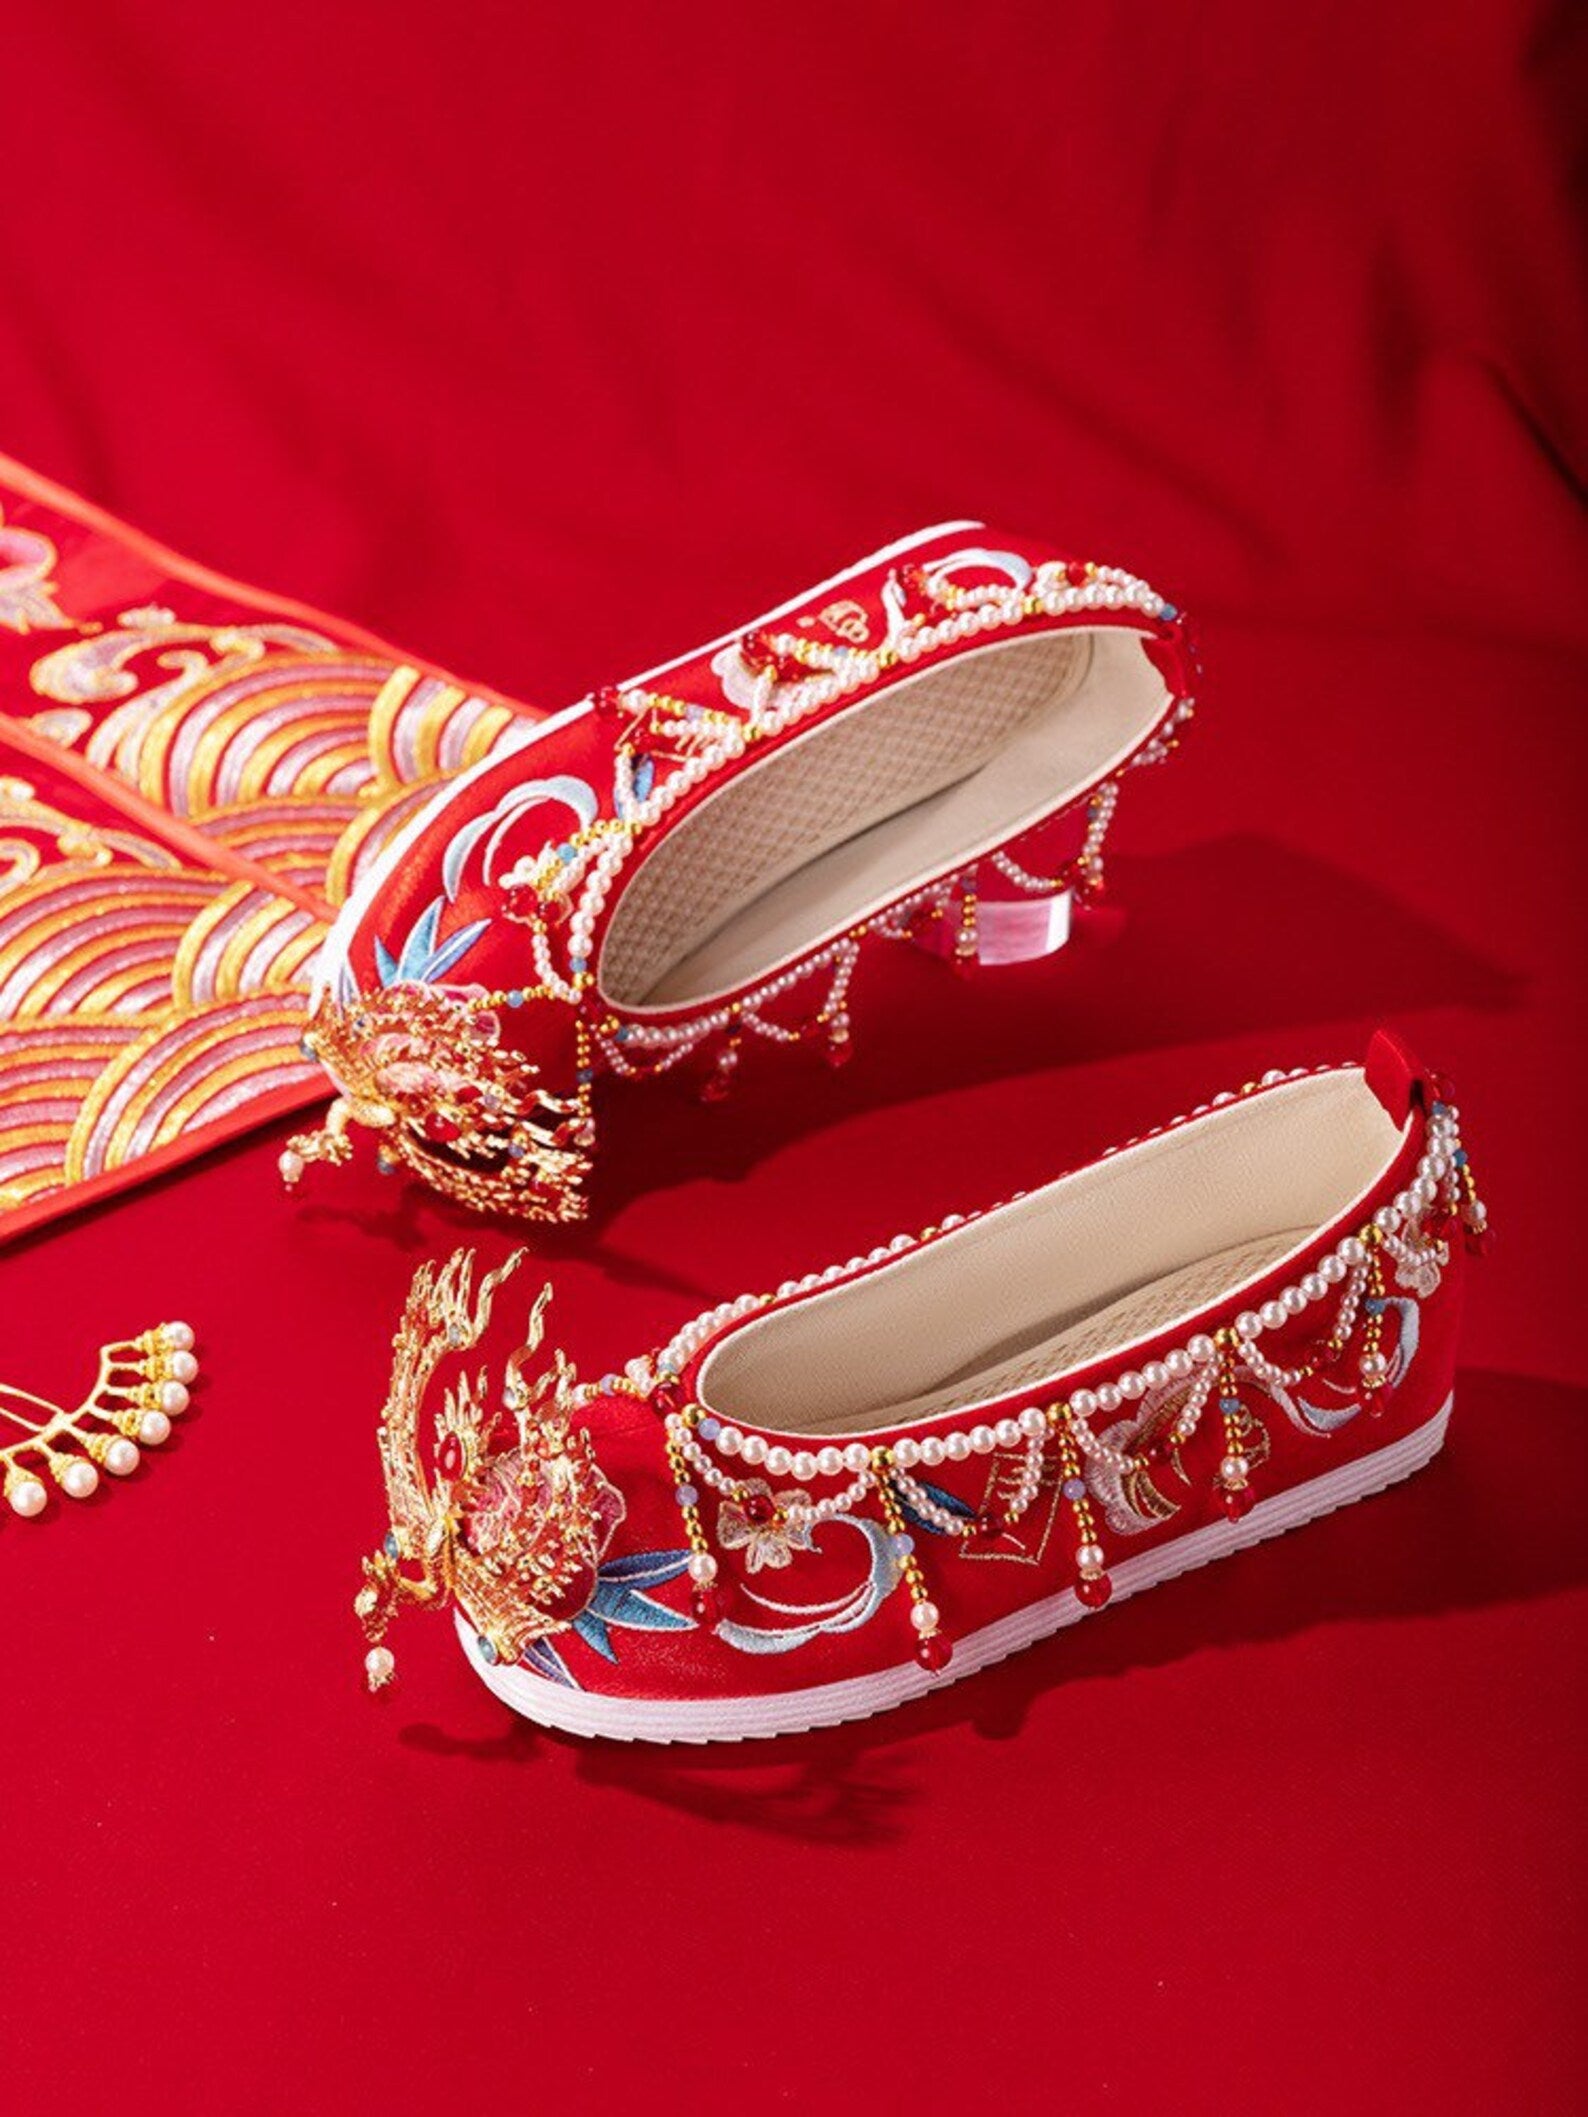 Traditional Red Chinese Wedding Shoes On Stock Photo 571761610 |  Shutterstock